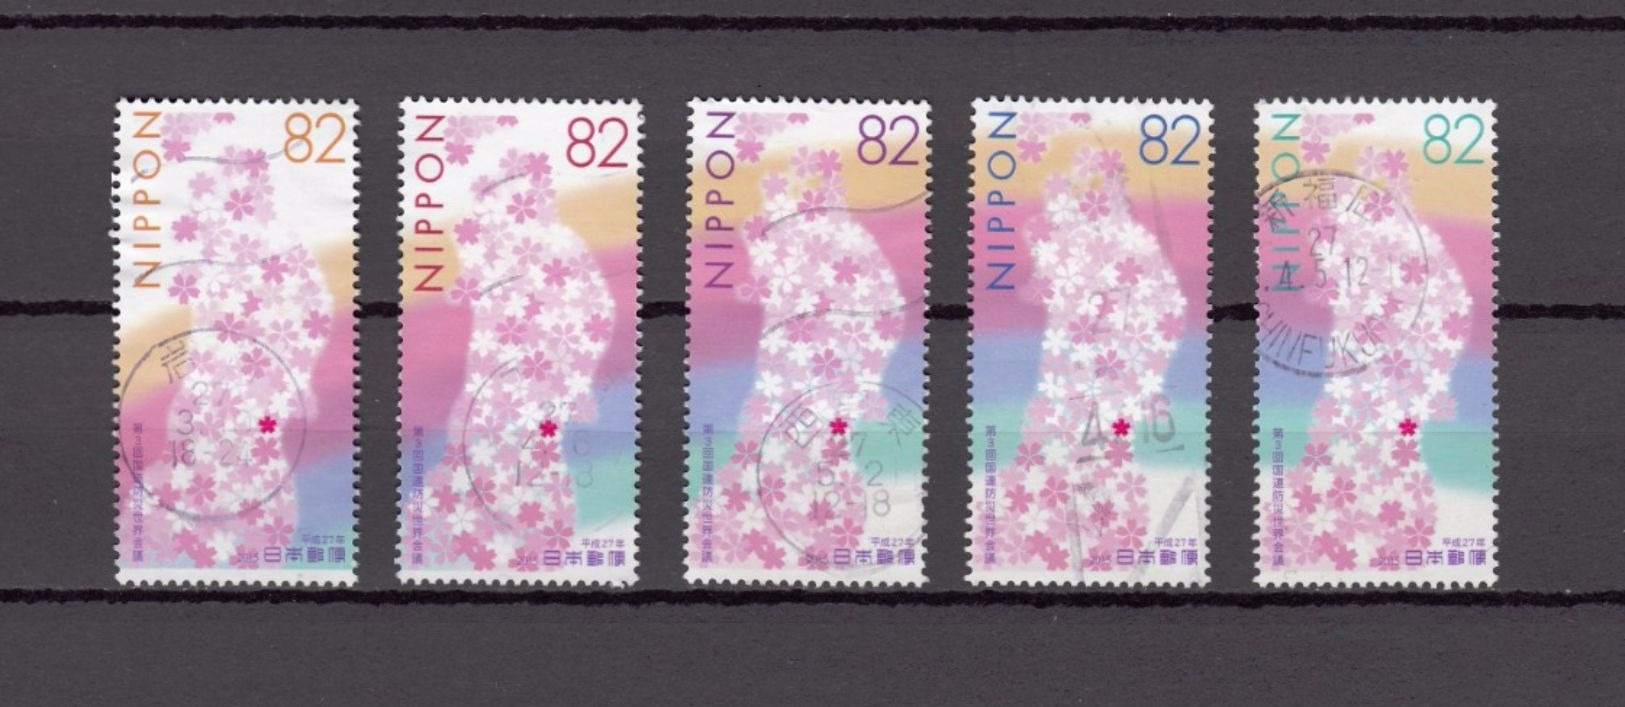 Japan 2015 - UN Conference On Disaster Risk Reduction, Used Stamps, Michelnr. 7176-80 - Usati